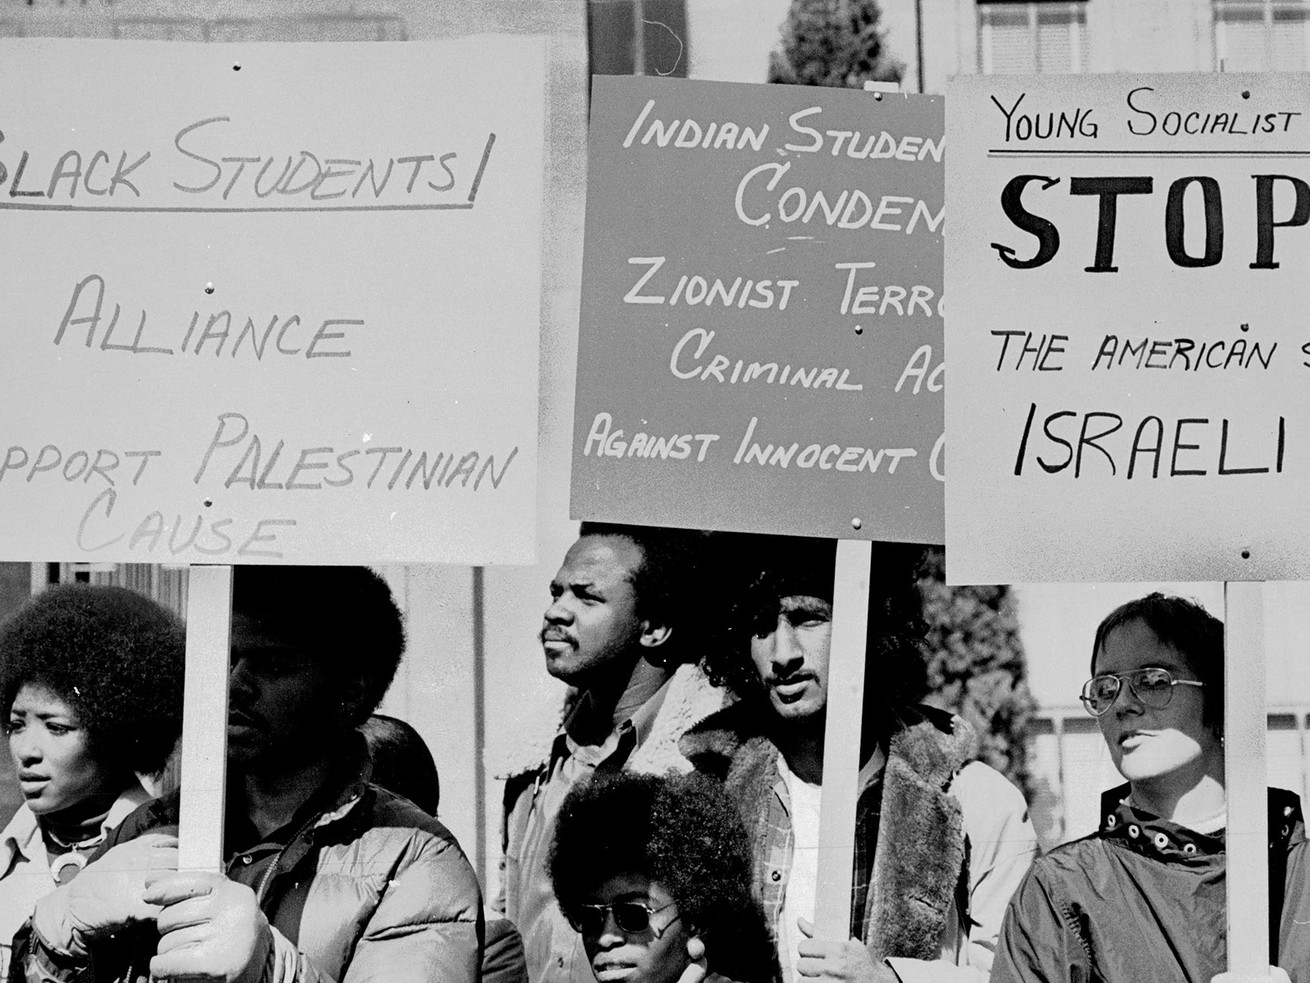 A black-and-white photo shows a group of students marching with handmade signs.